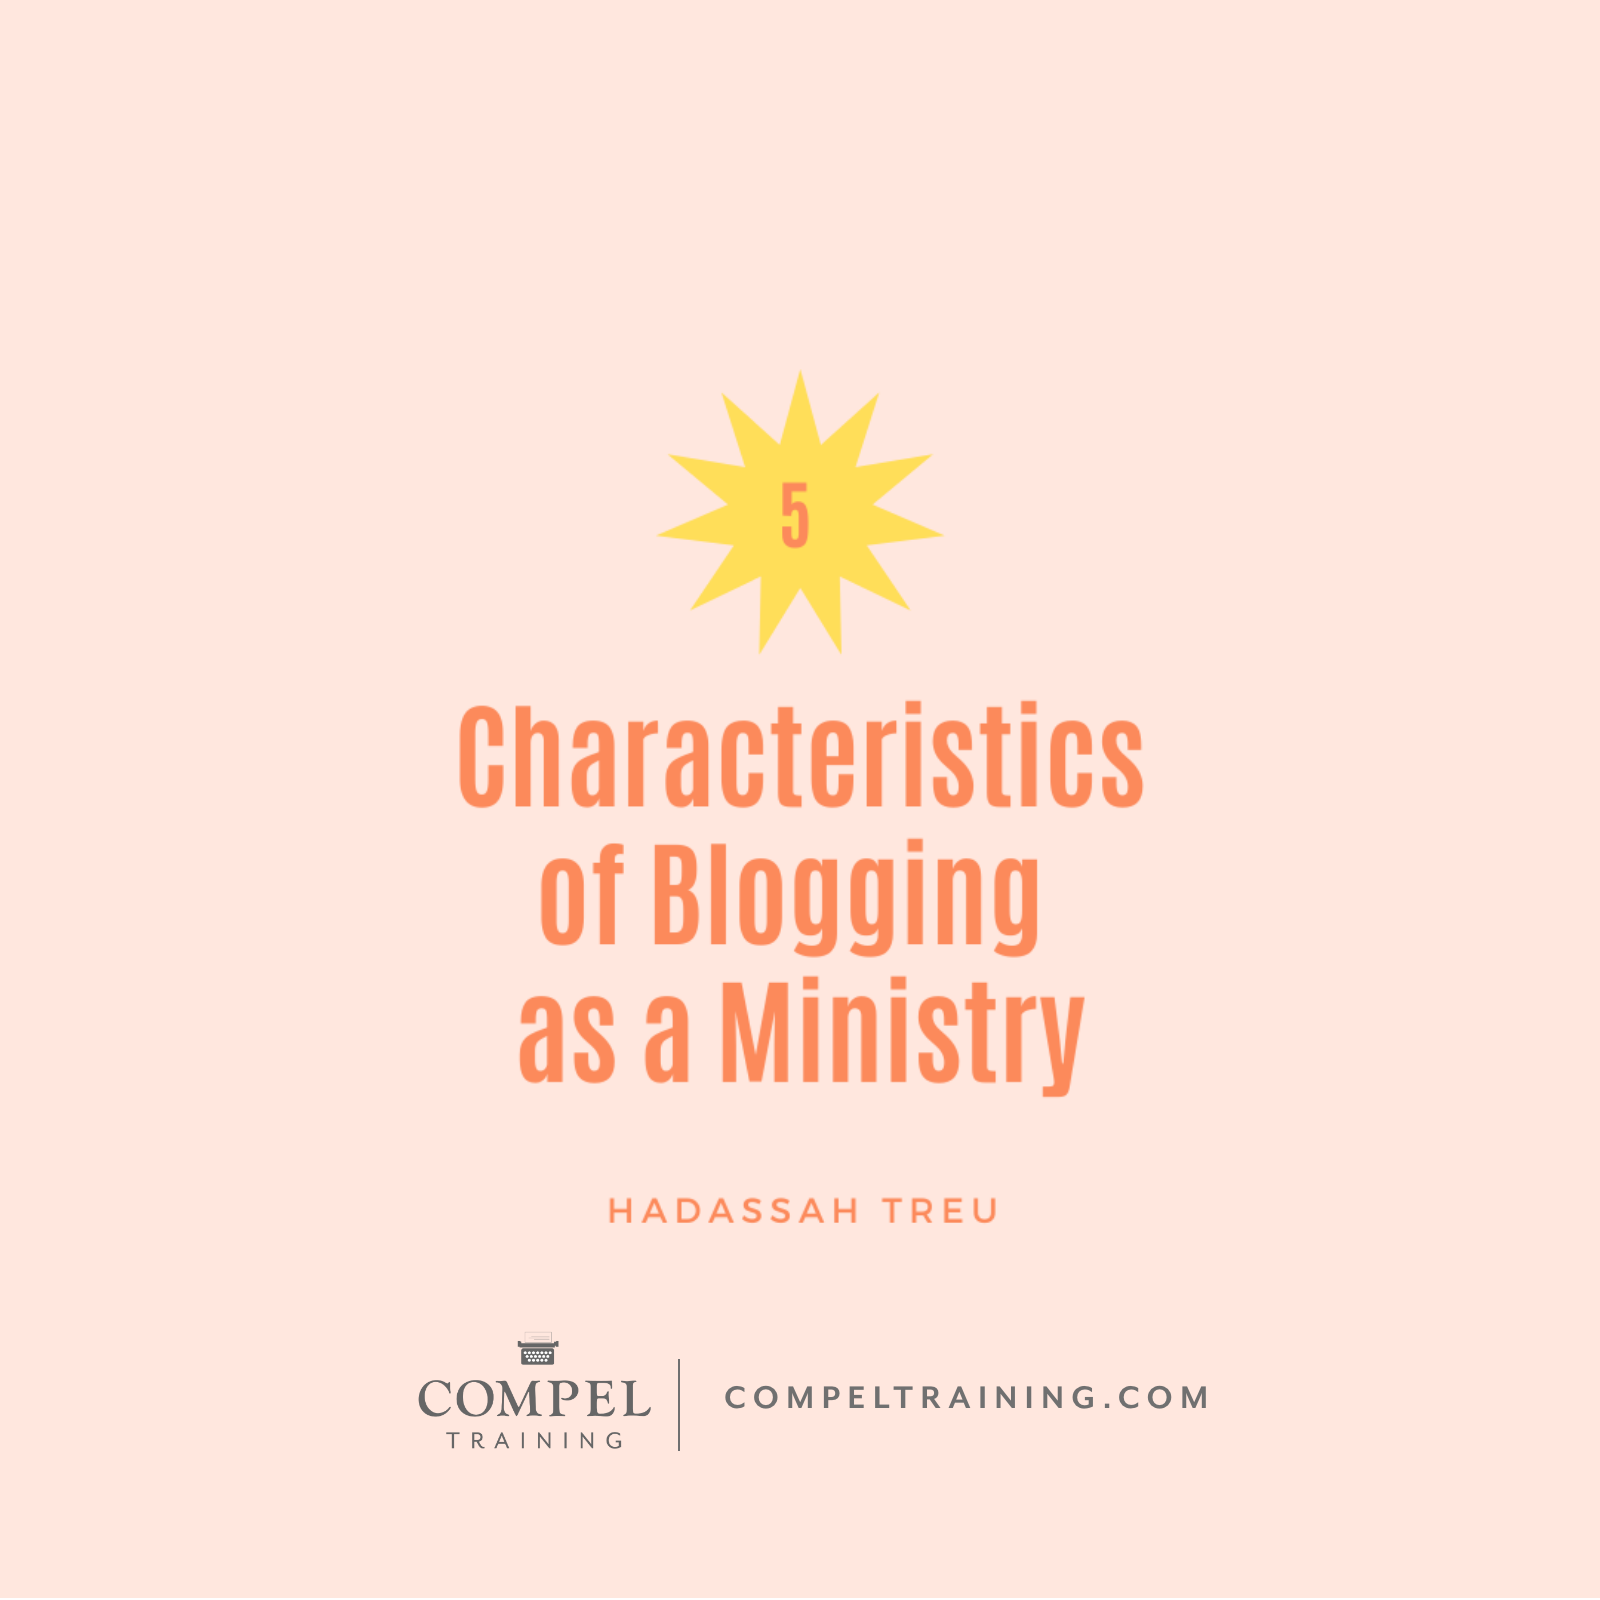 5 Characteristics of Blogging as a Ministry